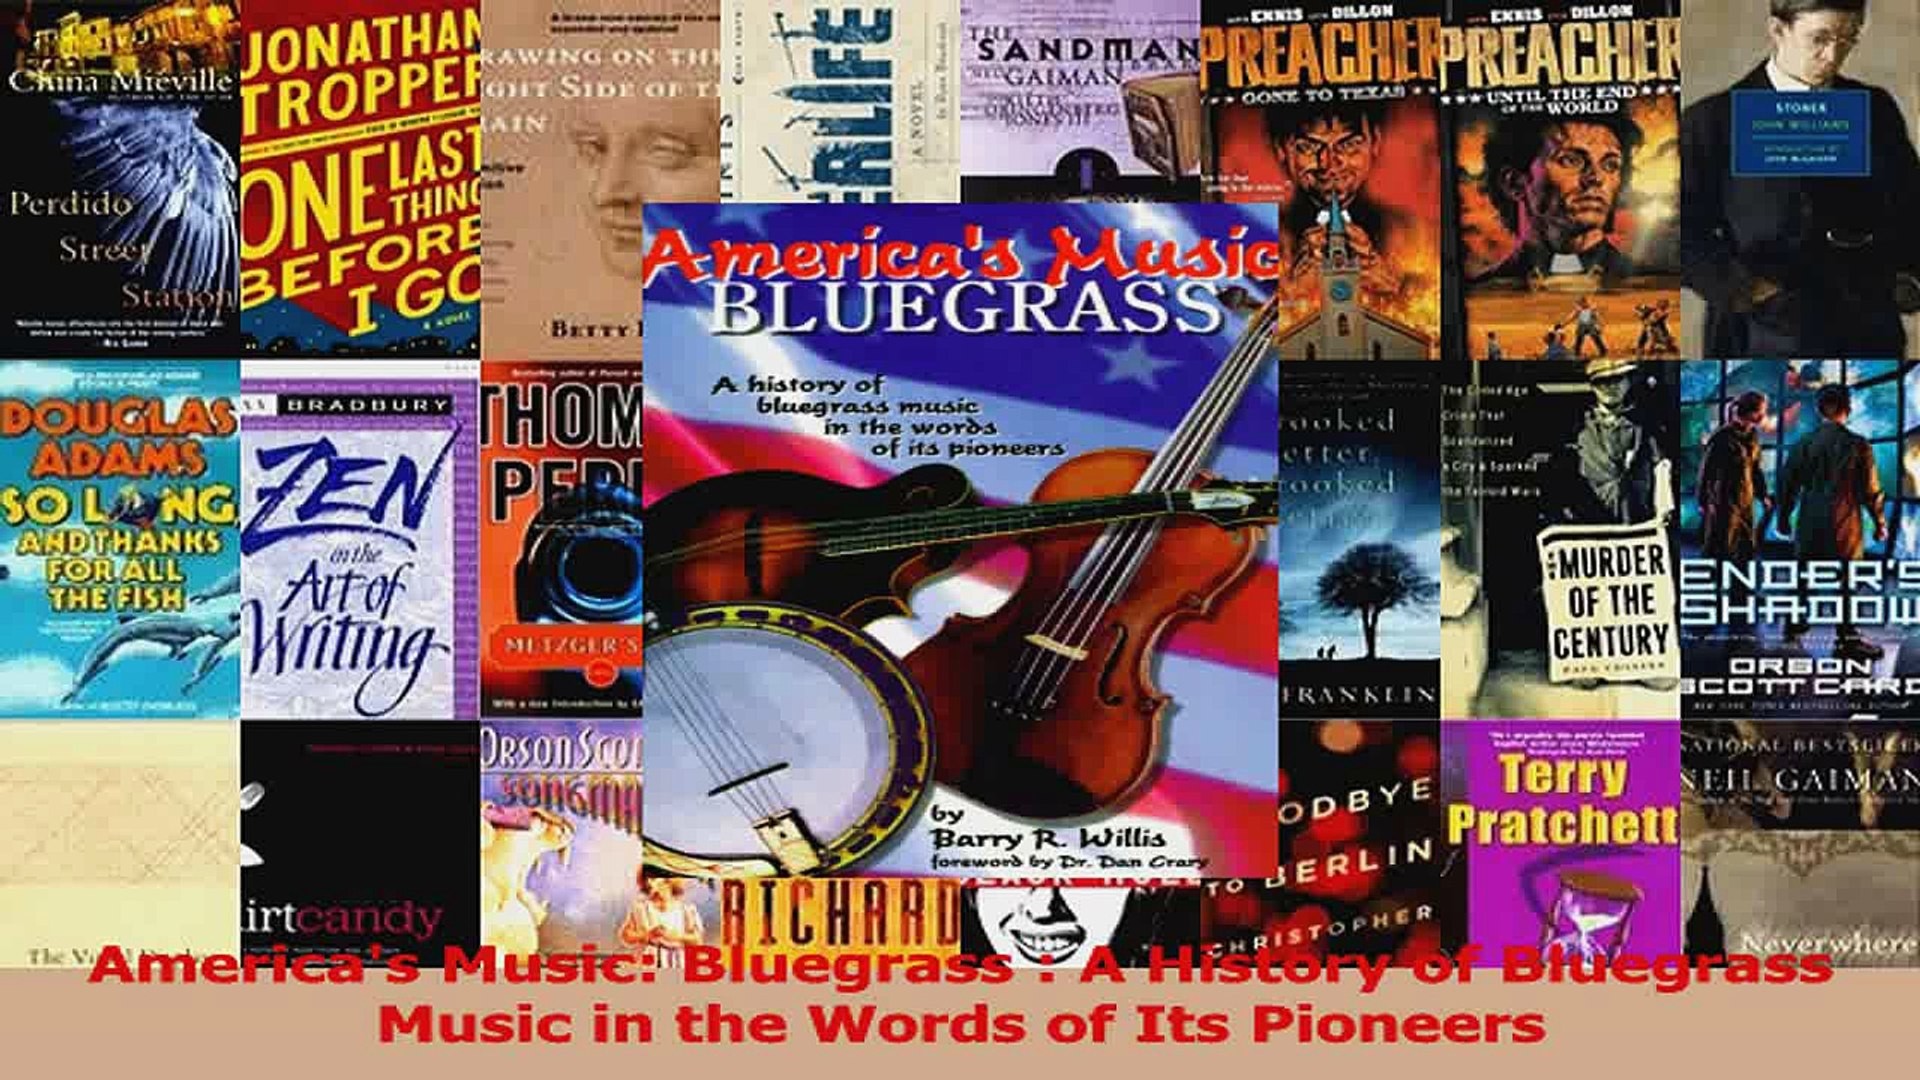 1920x1080 Download Americas Music Bluegrass A History of Bluegrass Music in the Words  of Its Pioneers Ebook Free - video dailymotion